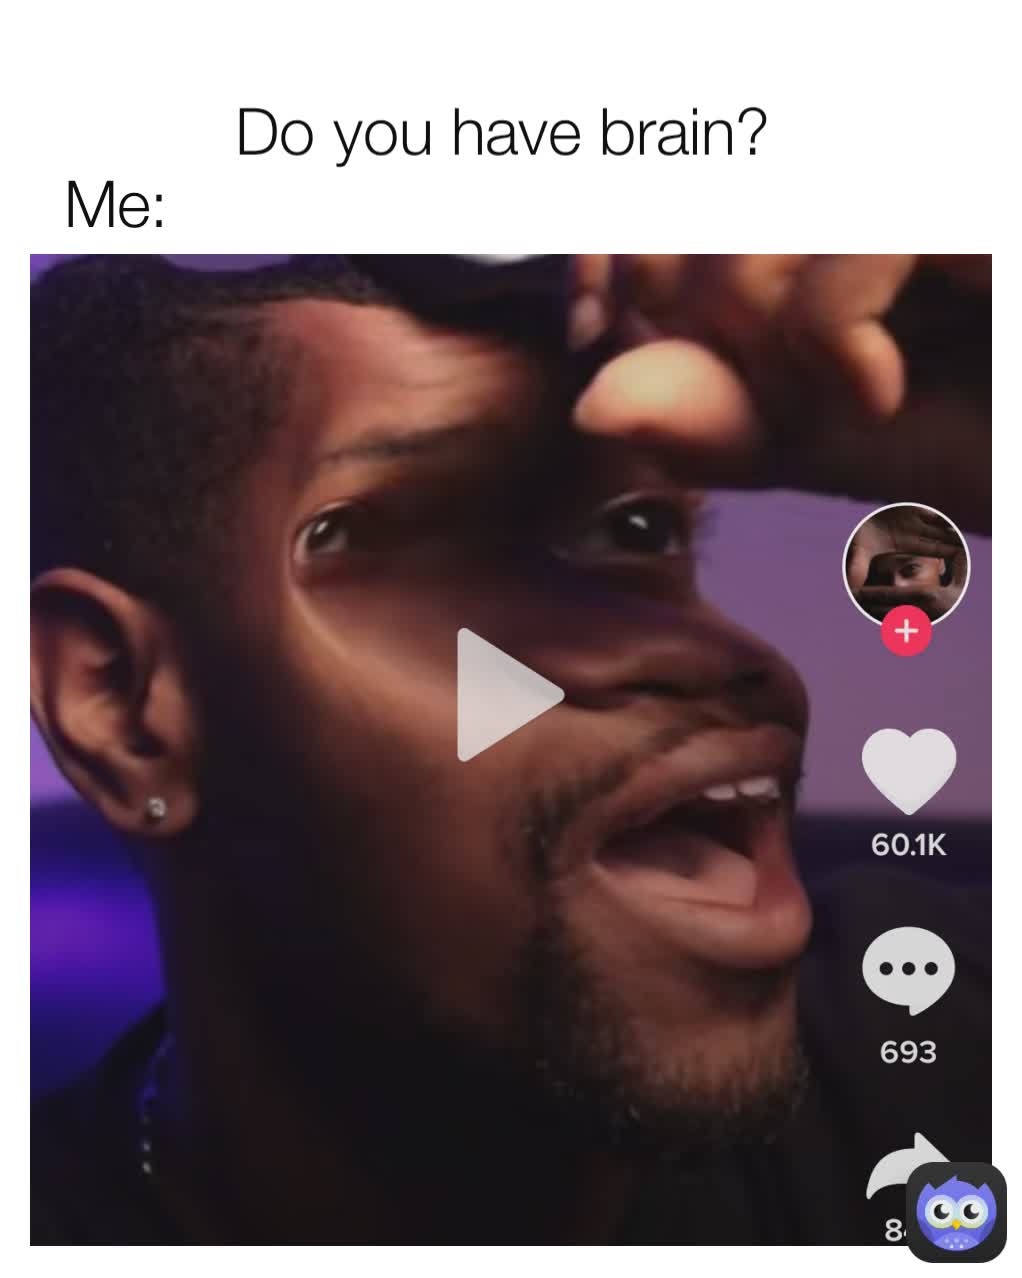 Me: Do you have brain? 